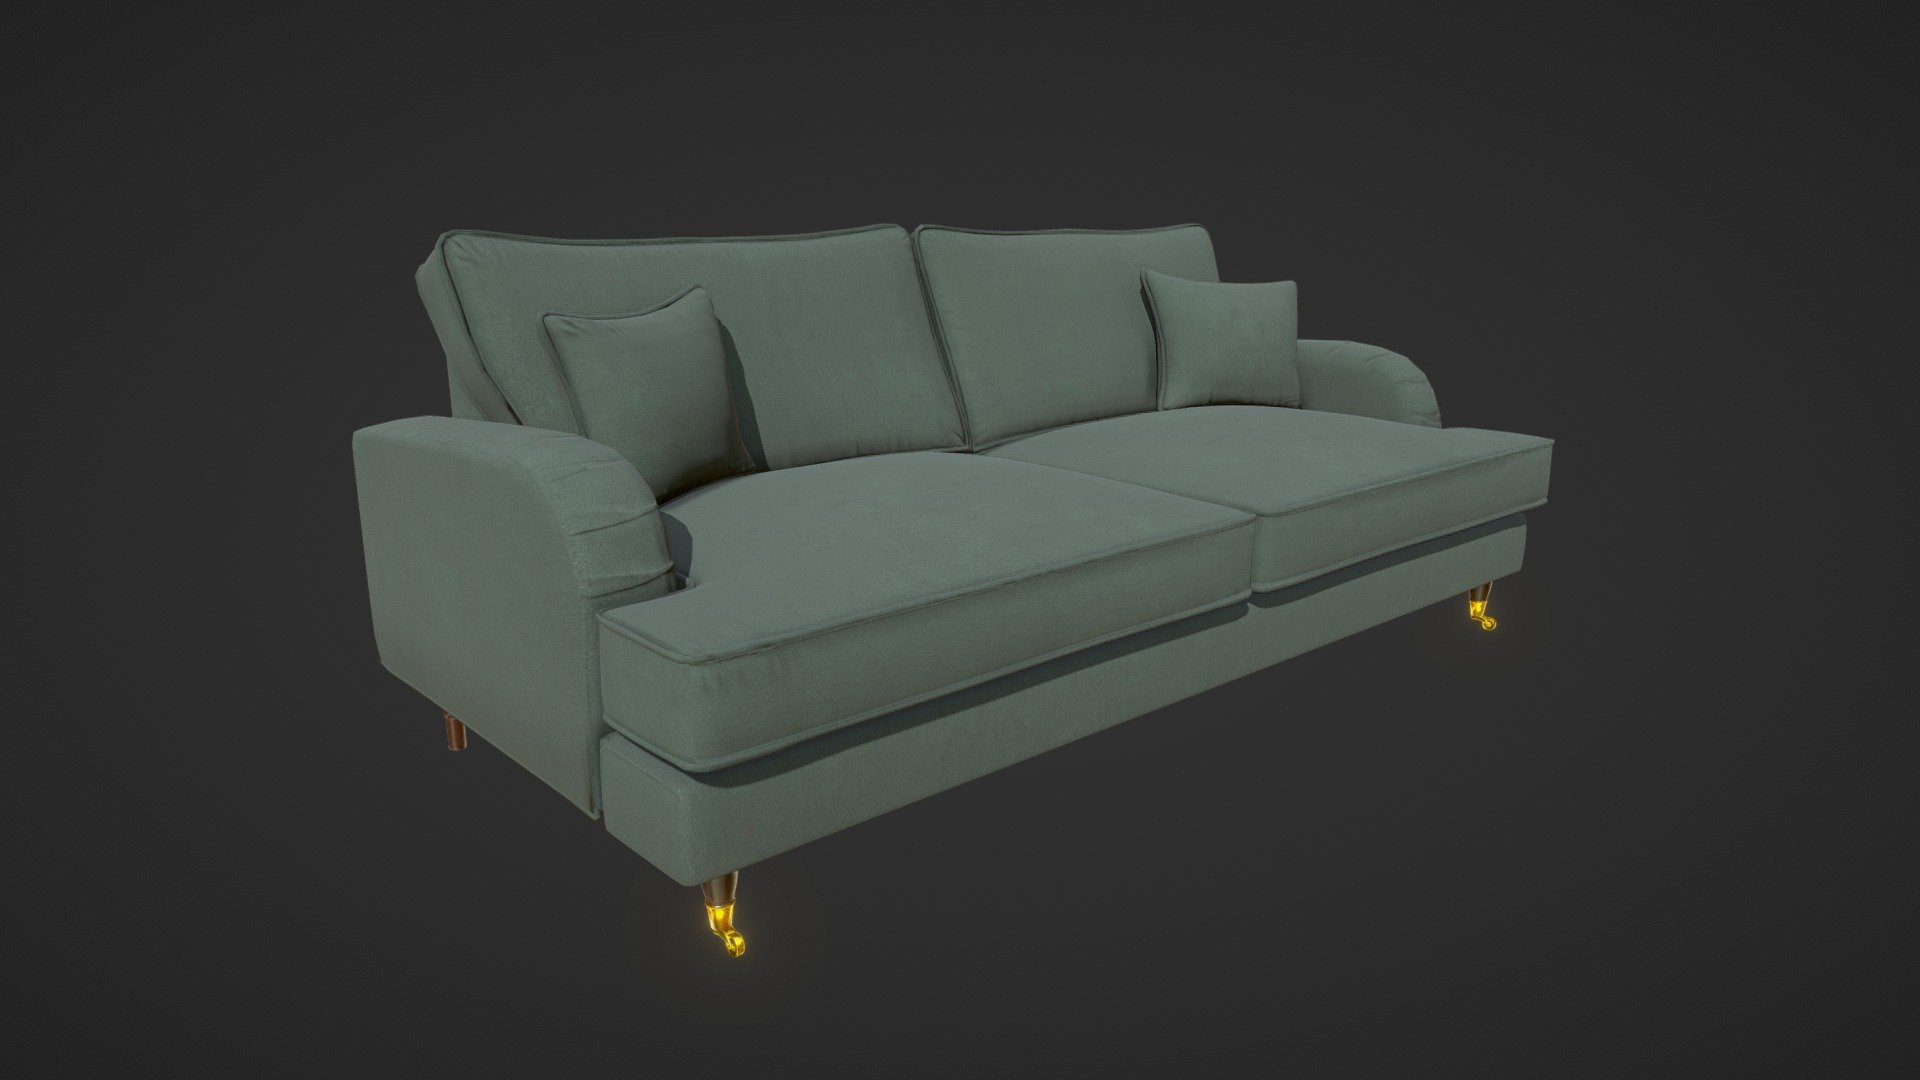 Low poly 3d model of sofa ready for AR. USDZ, DAE file formats included - Sofa - Buy Royalty Free 3D model by AVRcontent 3d model